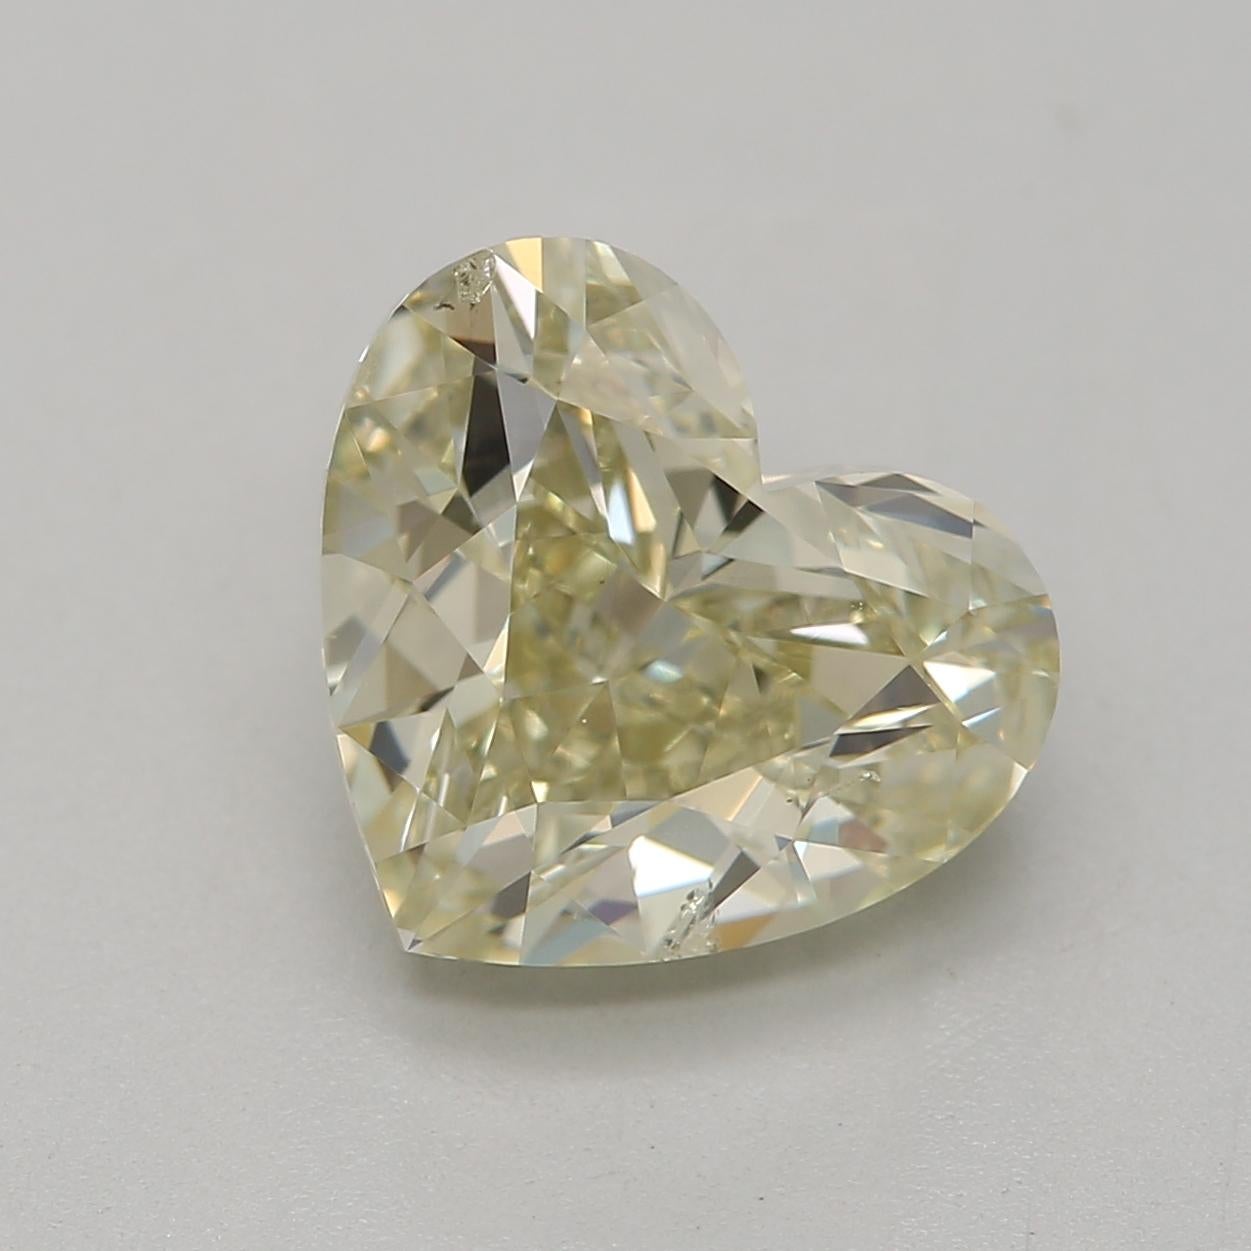 ***100% NATURAL FANCY COLOUR DIAMOND***

✪ Diamond Details ✪

➛ Shape: Heart
➛ Colour Grade: Fancy Light Brownish Greenish Yellow
➛ Carat: 2.00
➛ Clarity: SI2
➛ GIA Certified 

^FEATURES OF THE DIAMOND^

Our heart-shaped diamond is a unique and